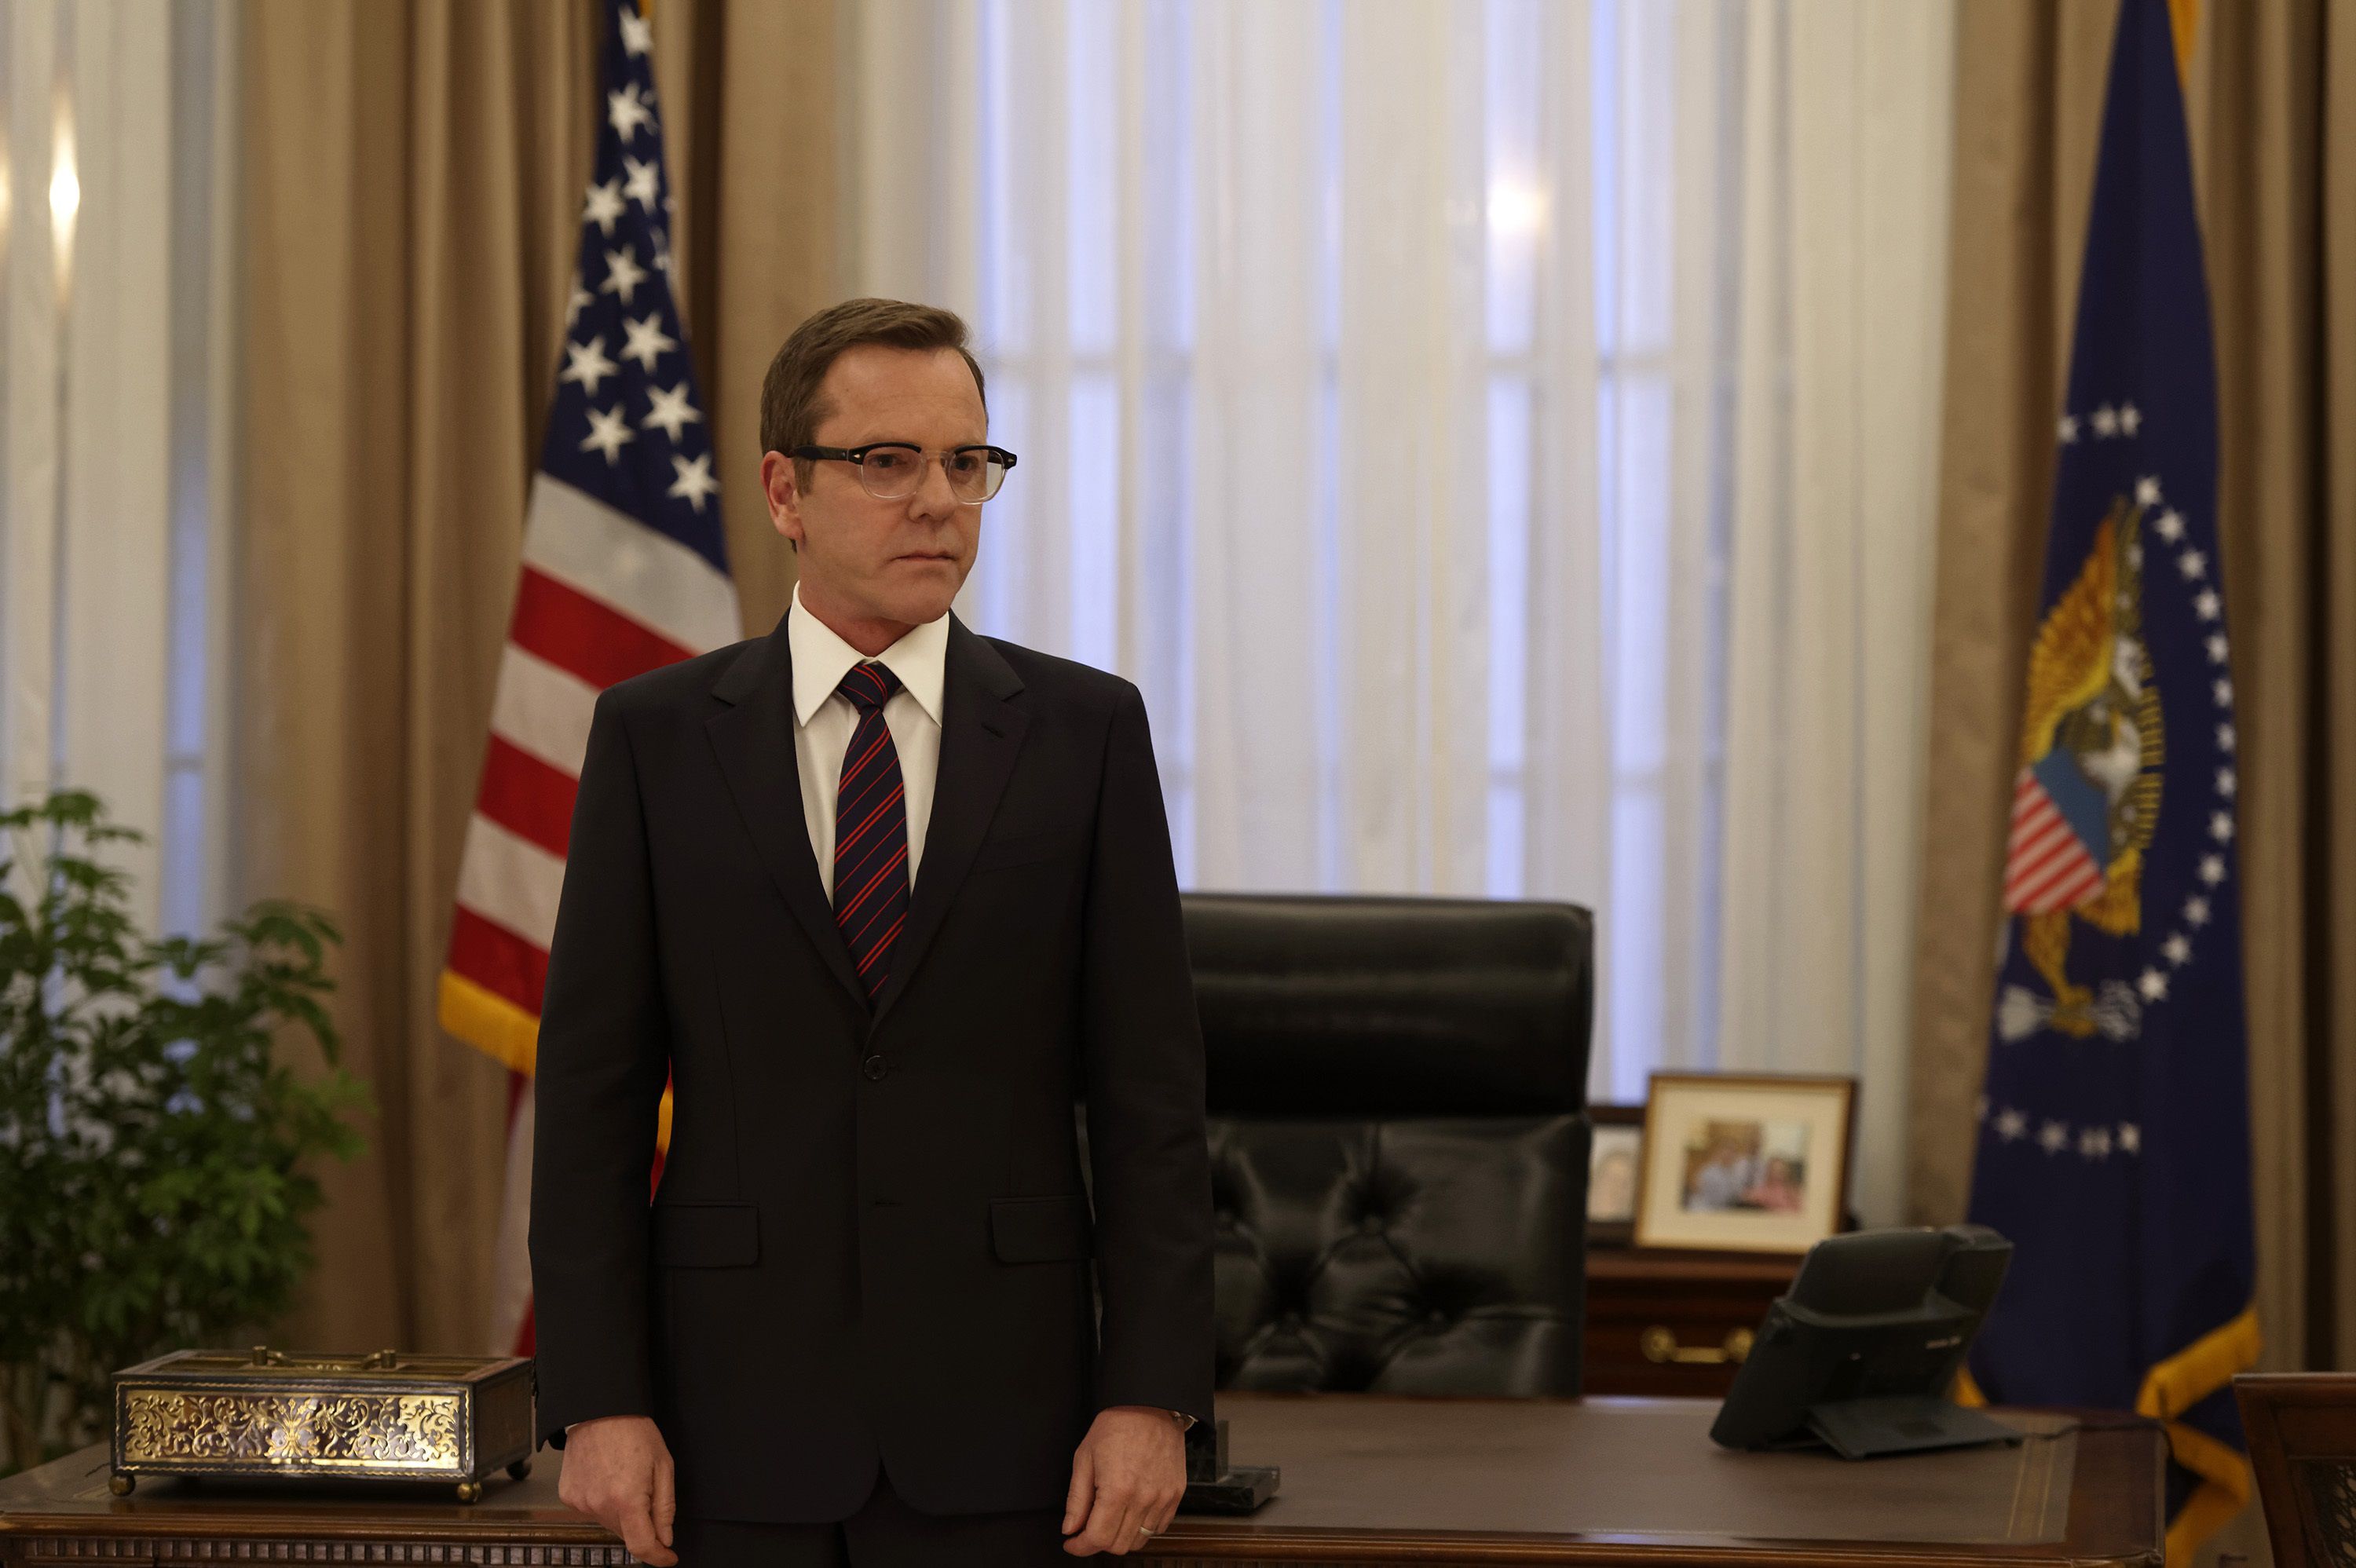 10 TV Shows You Must Watch if You Love Designated Survivor